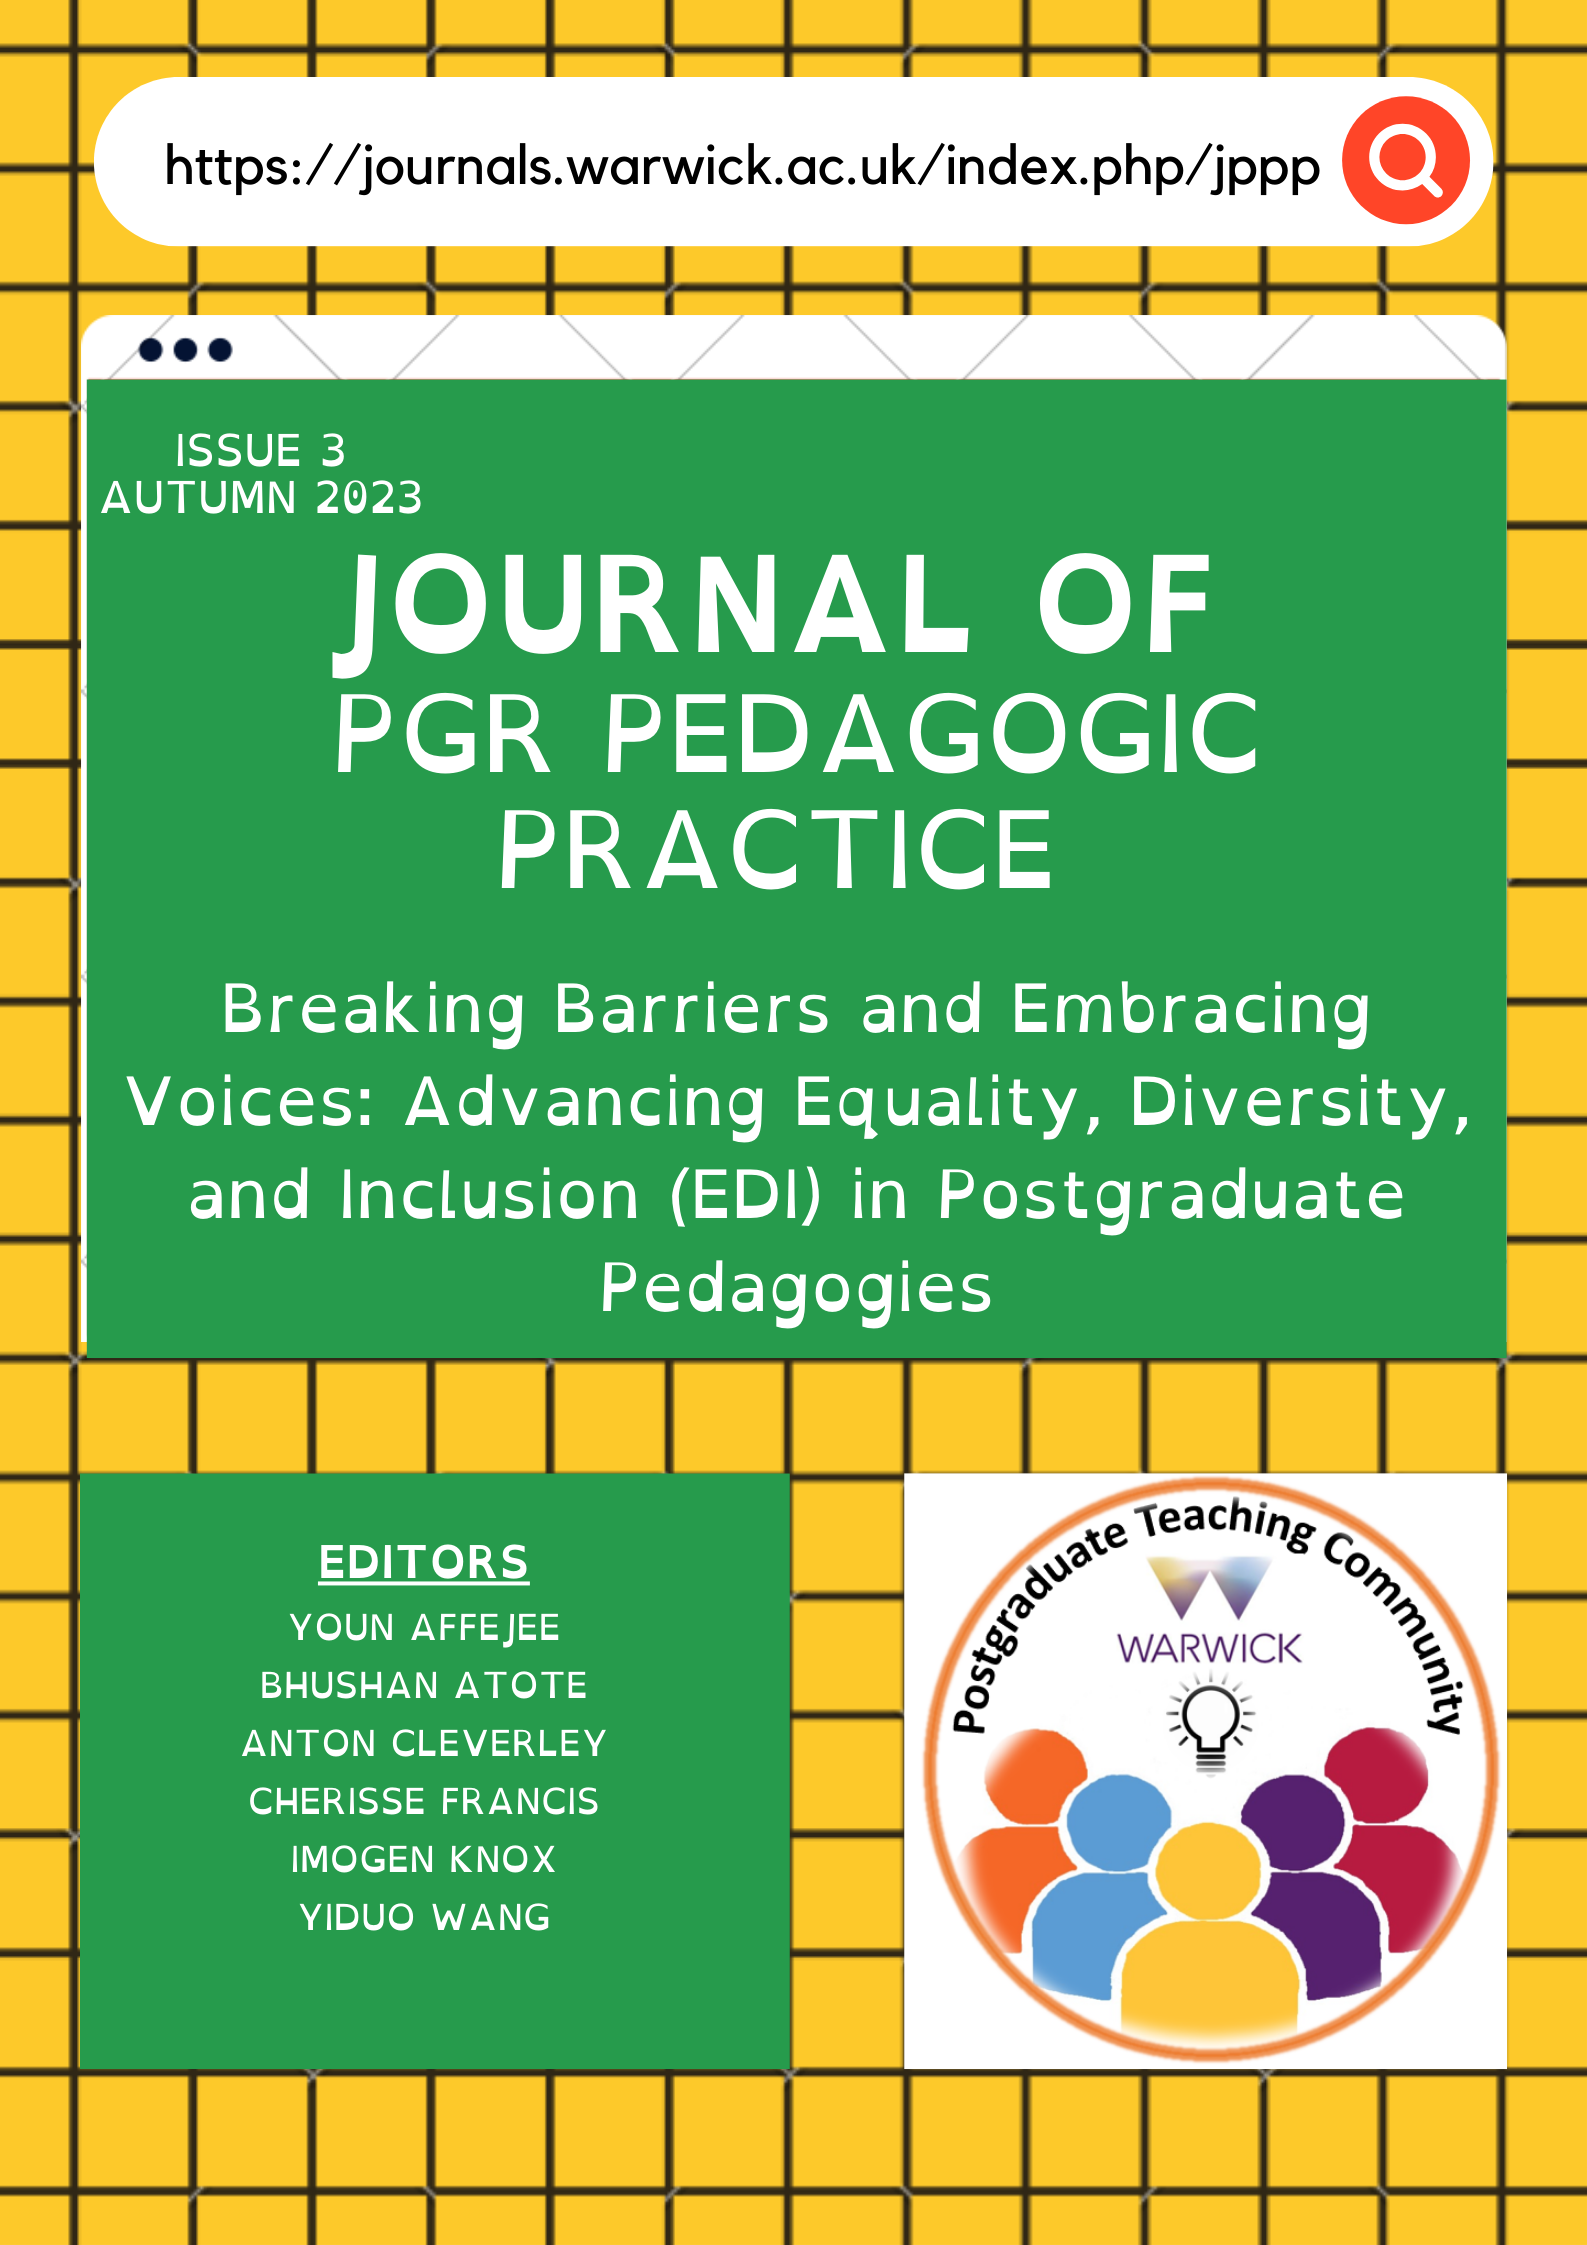 					View Vol. 3 (2023): Journal of PGR Pedagogic Practice: Breaking Barriers and Embracing Voices; Advancing Equality, Diversity and Inclusion (EDI) in Postgraduate Pedagogies
				